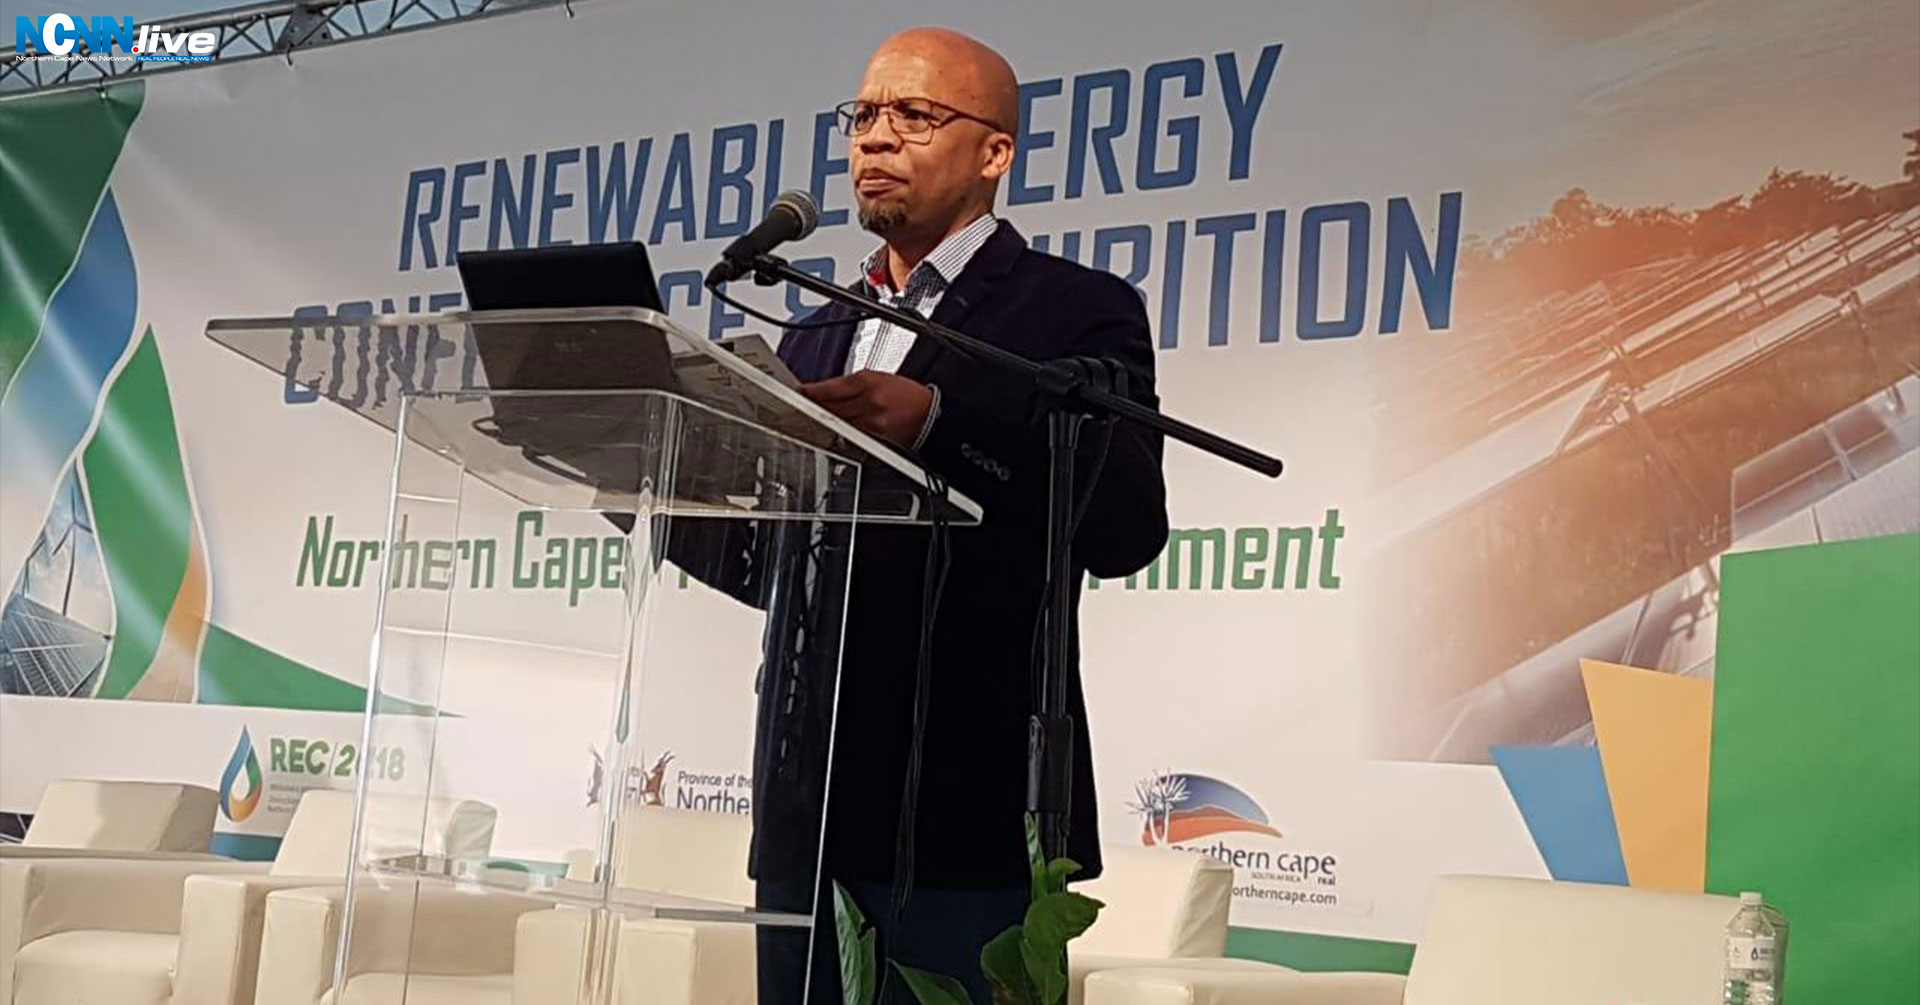 NORTHERN_CAPE_SEEKS_NEW_BENEFITS_OUT_OF_RENEWABLE_ENERGY-FI